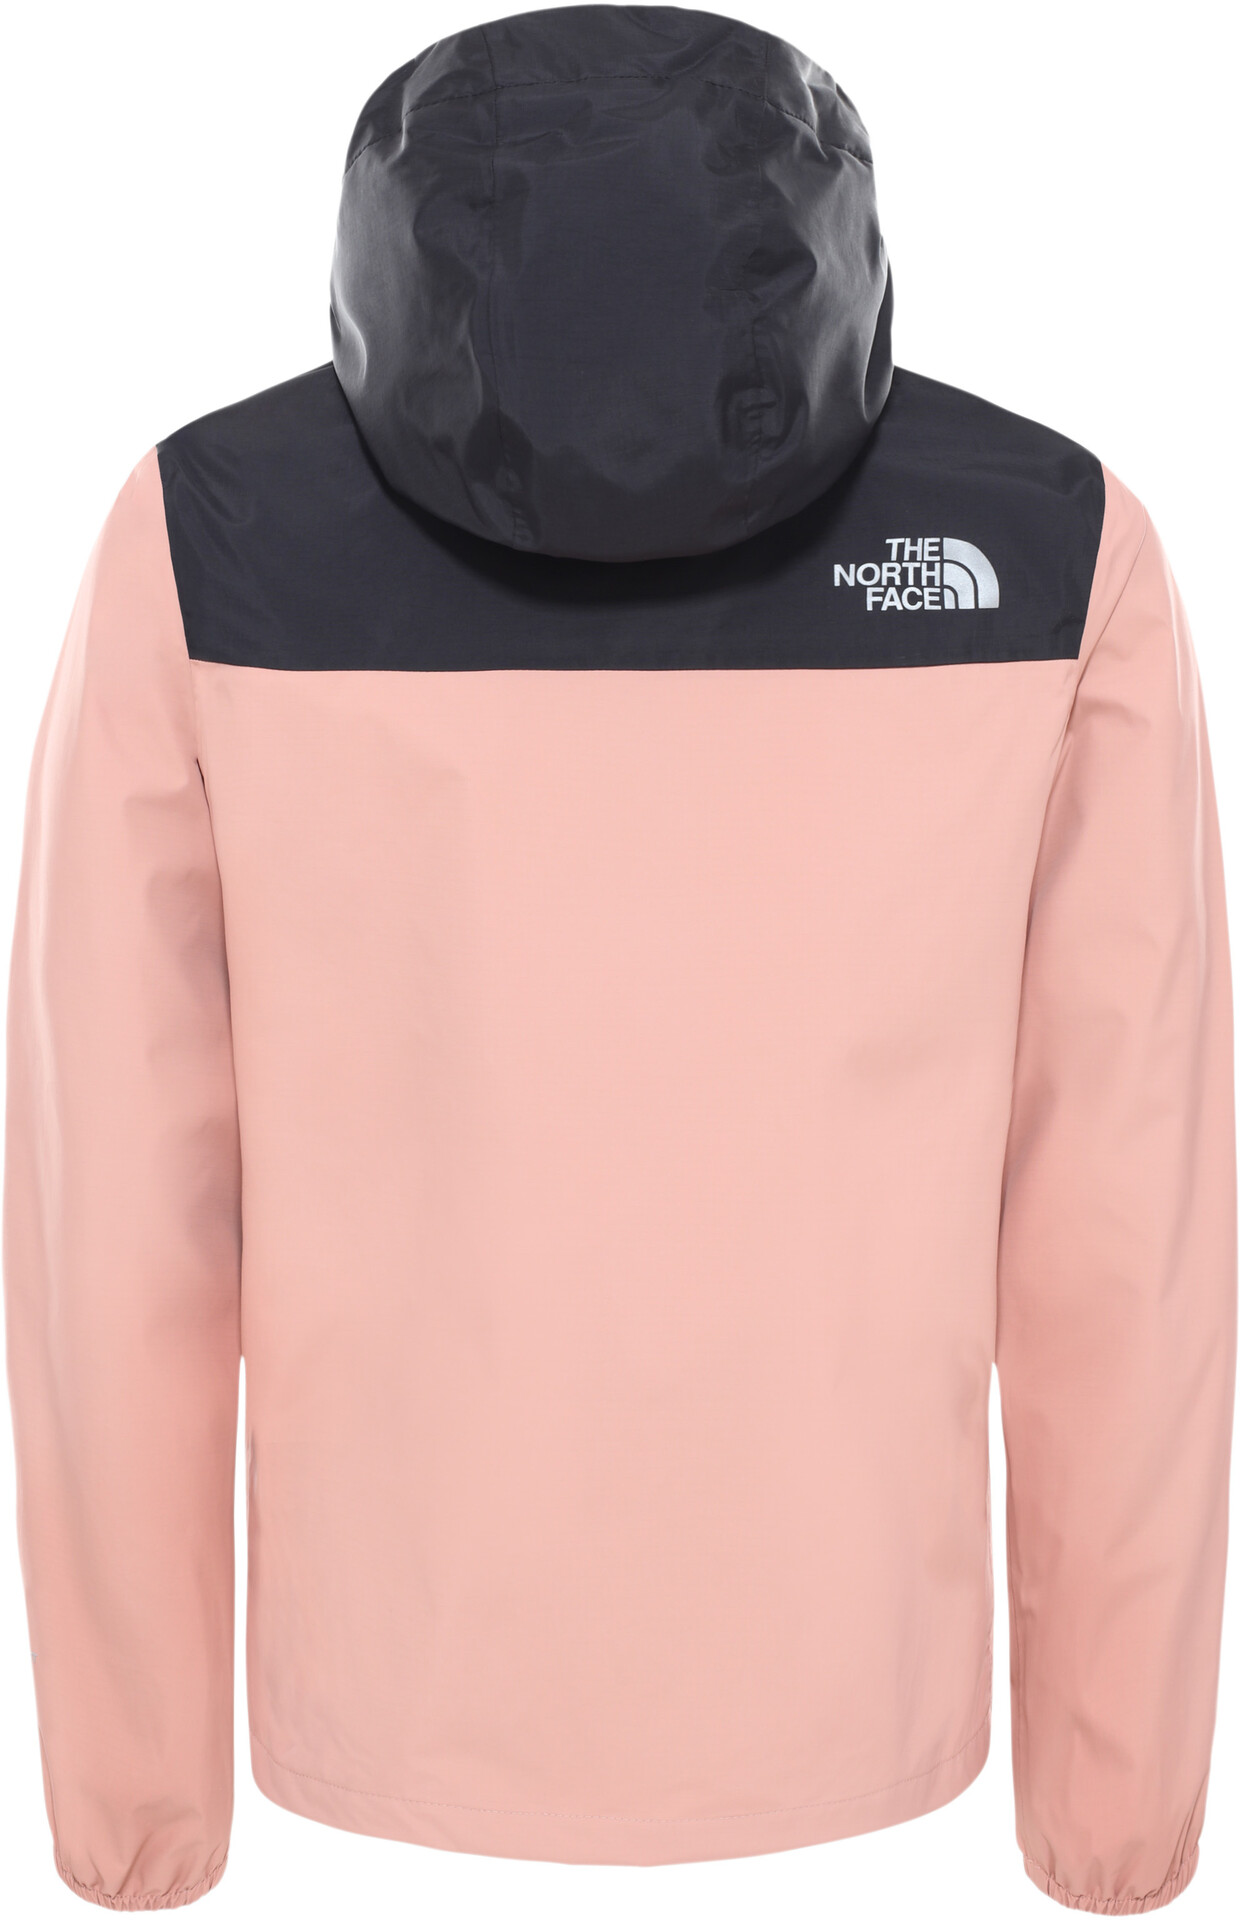 black north face jacket with pink logo